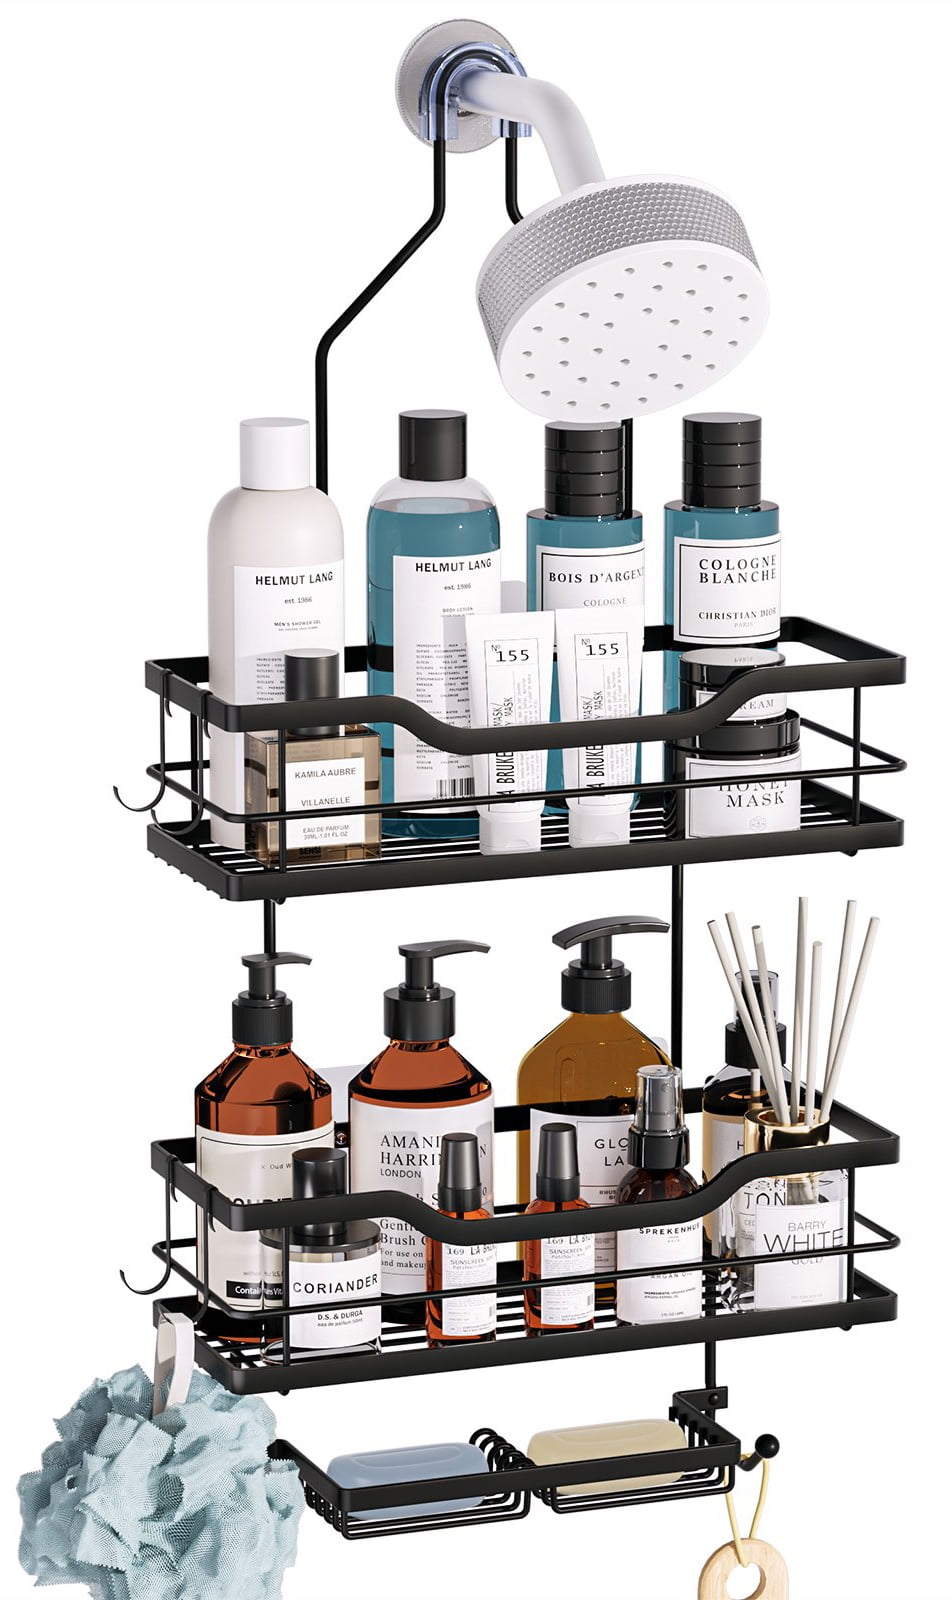 HapiRm Adhesive Shower Caddy Shower Organizer Shelf Build in Shampoo Holder,  No Drilling Rust Proof Stainless Steel Shower Storage Rack with 11 Hooks  for Hanging Shower Ball and Razor 